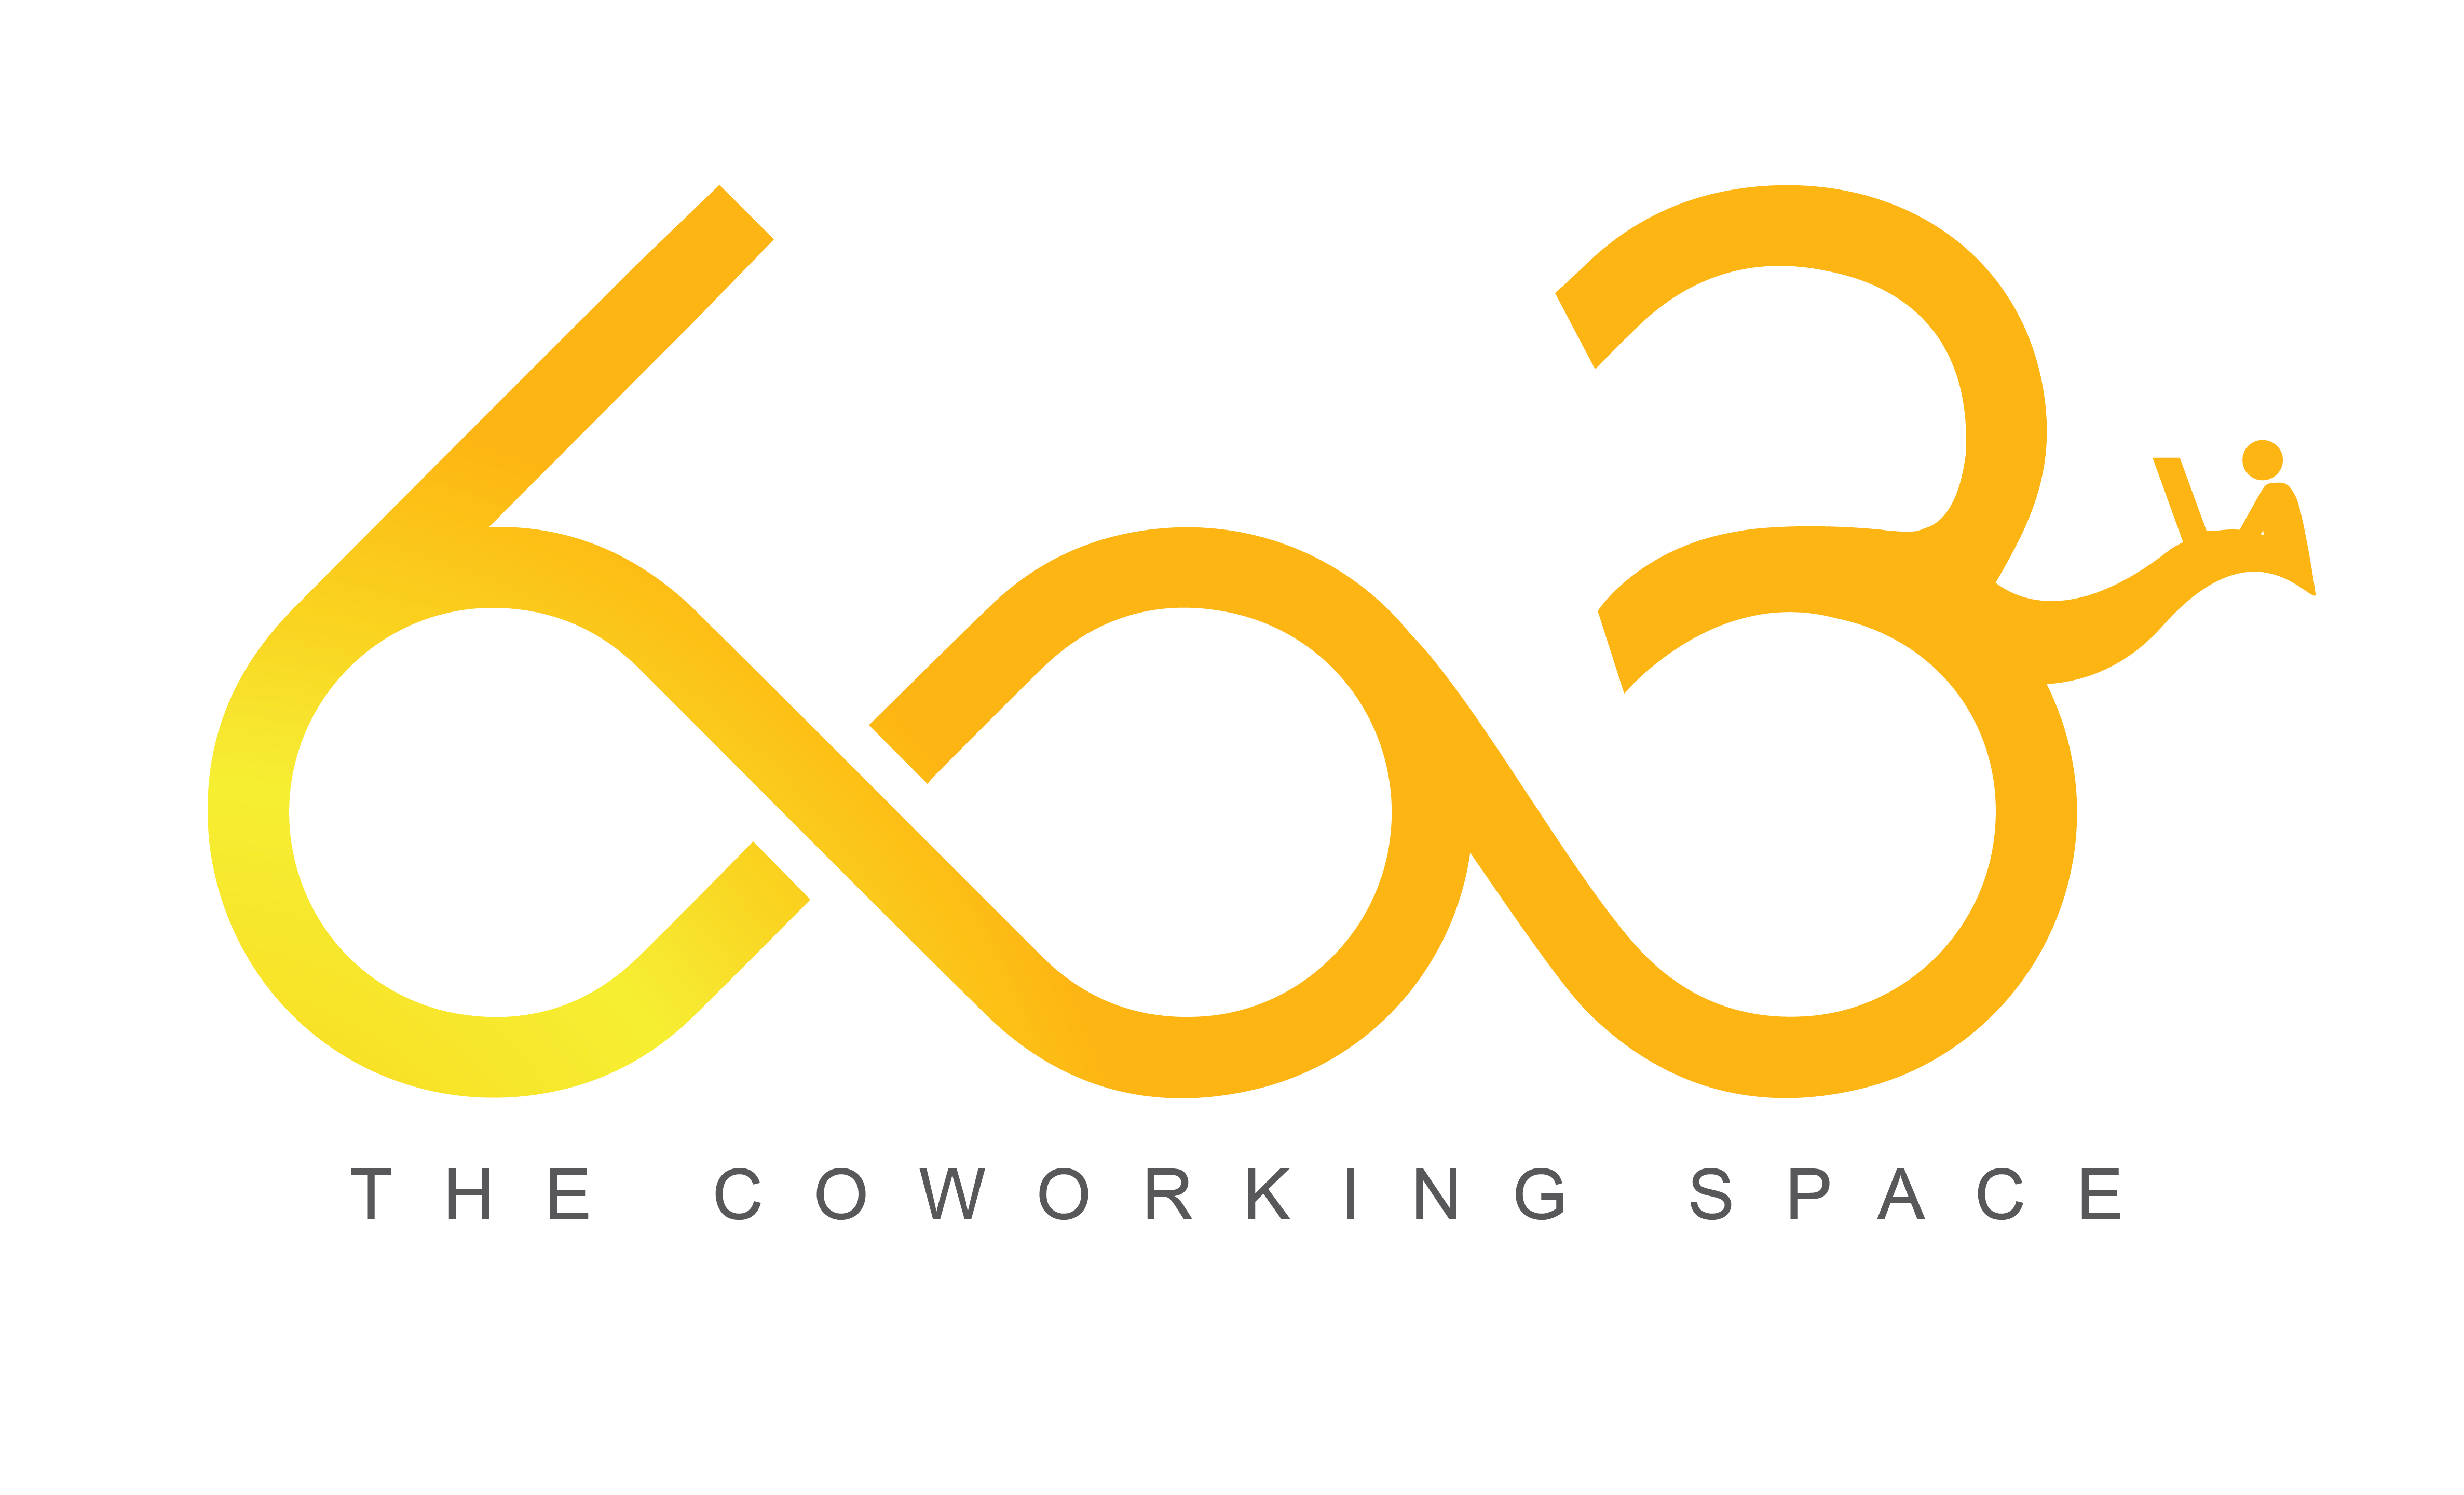 603 The CoWorking Space